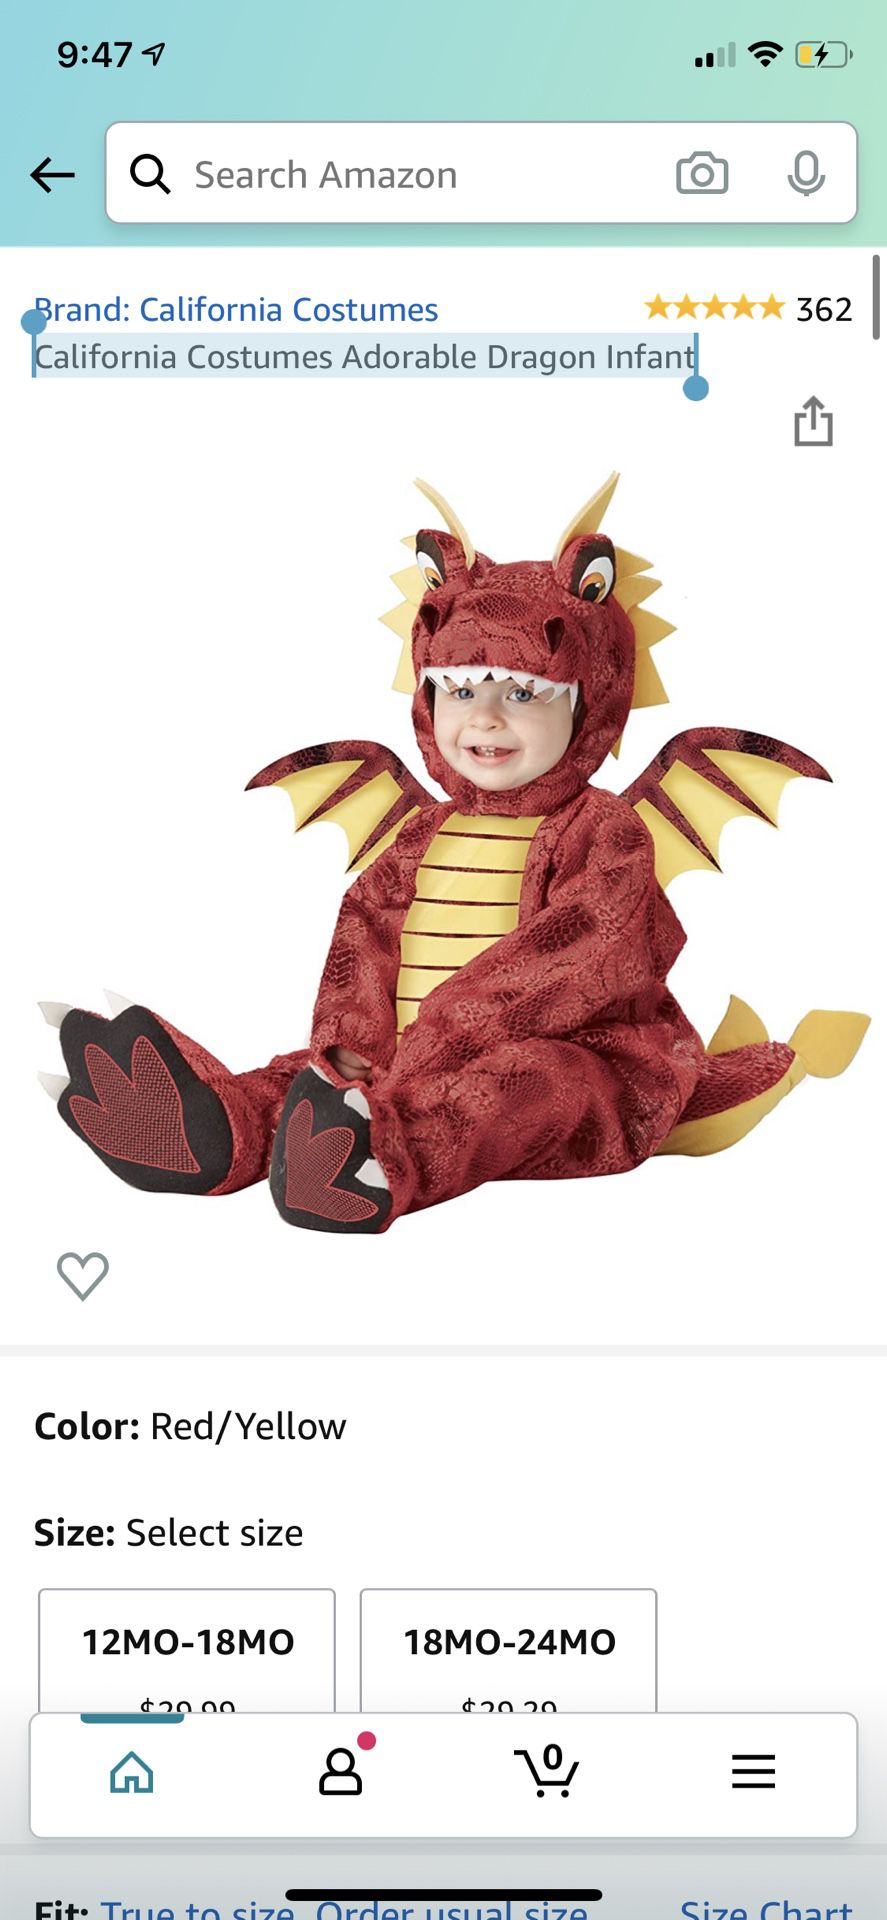 Brand new 12-18 months California Costumes Adorable Dragon Infant